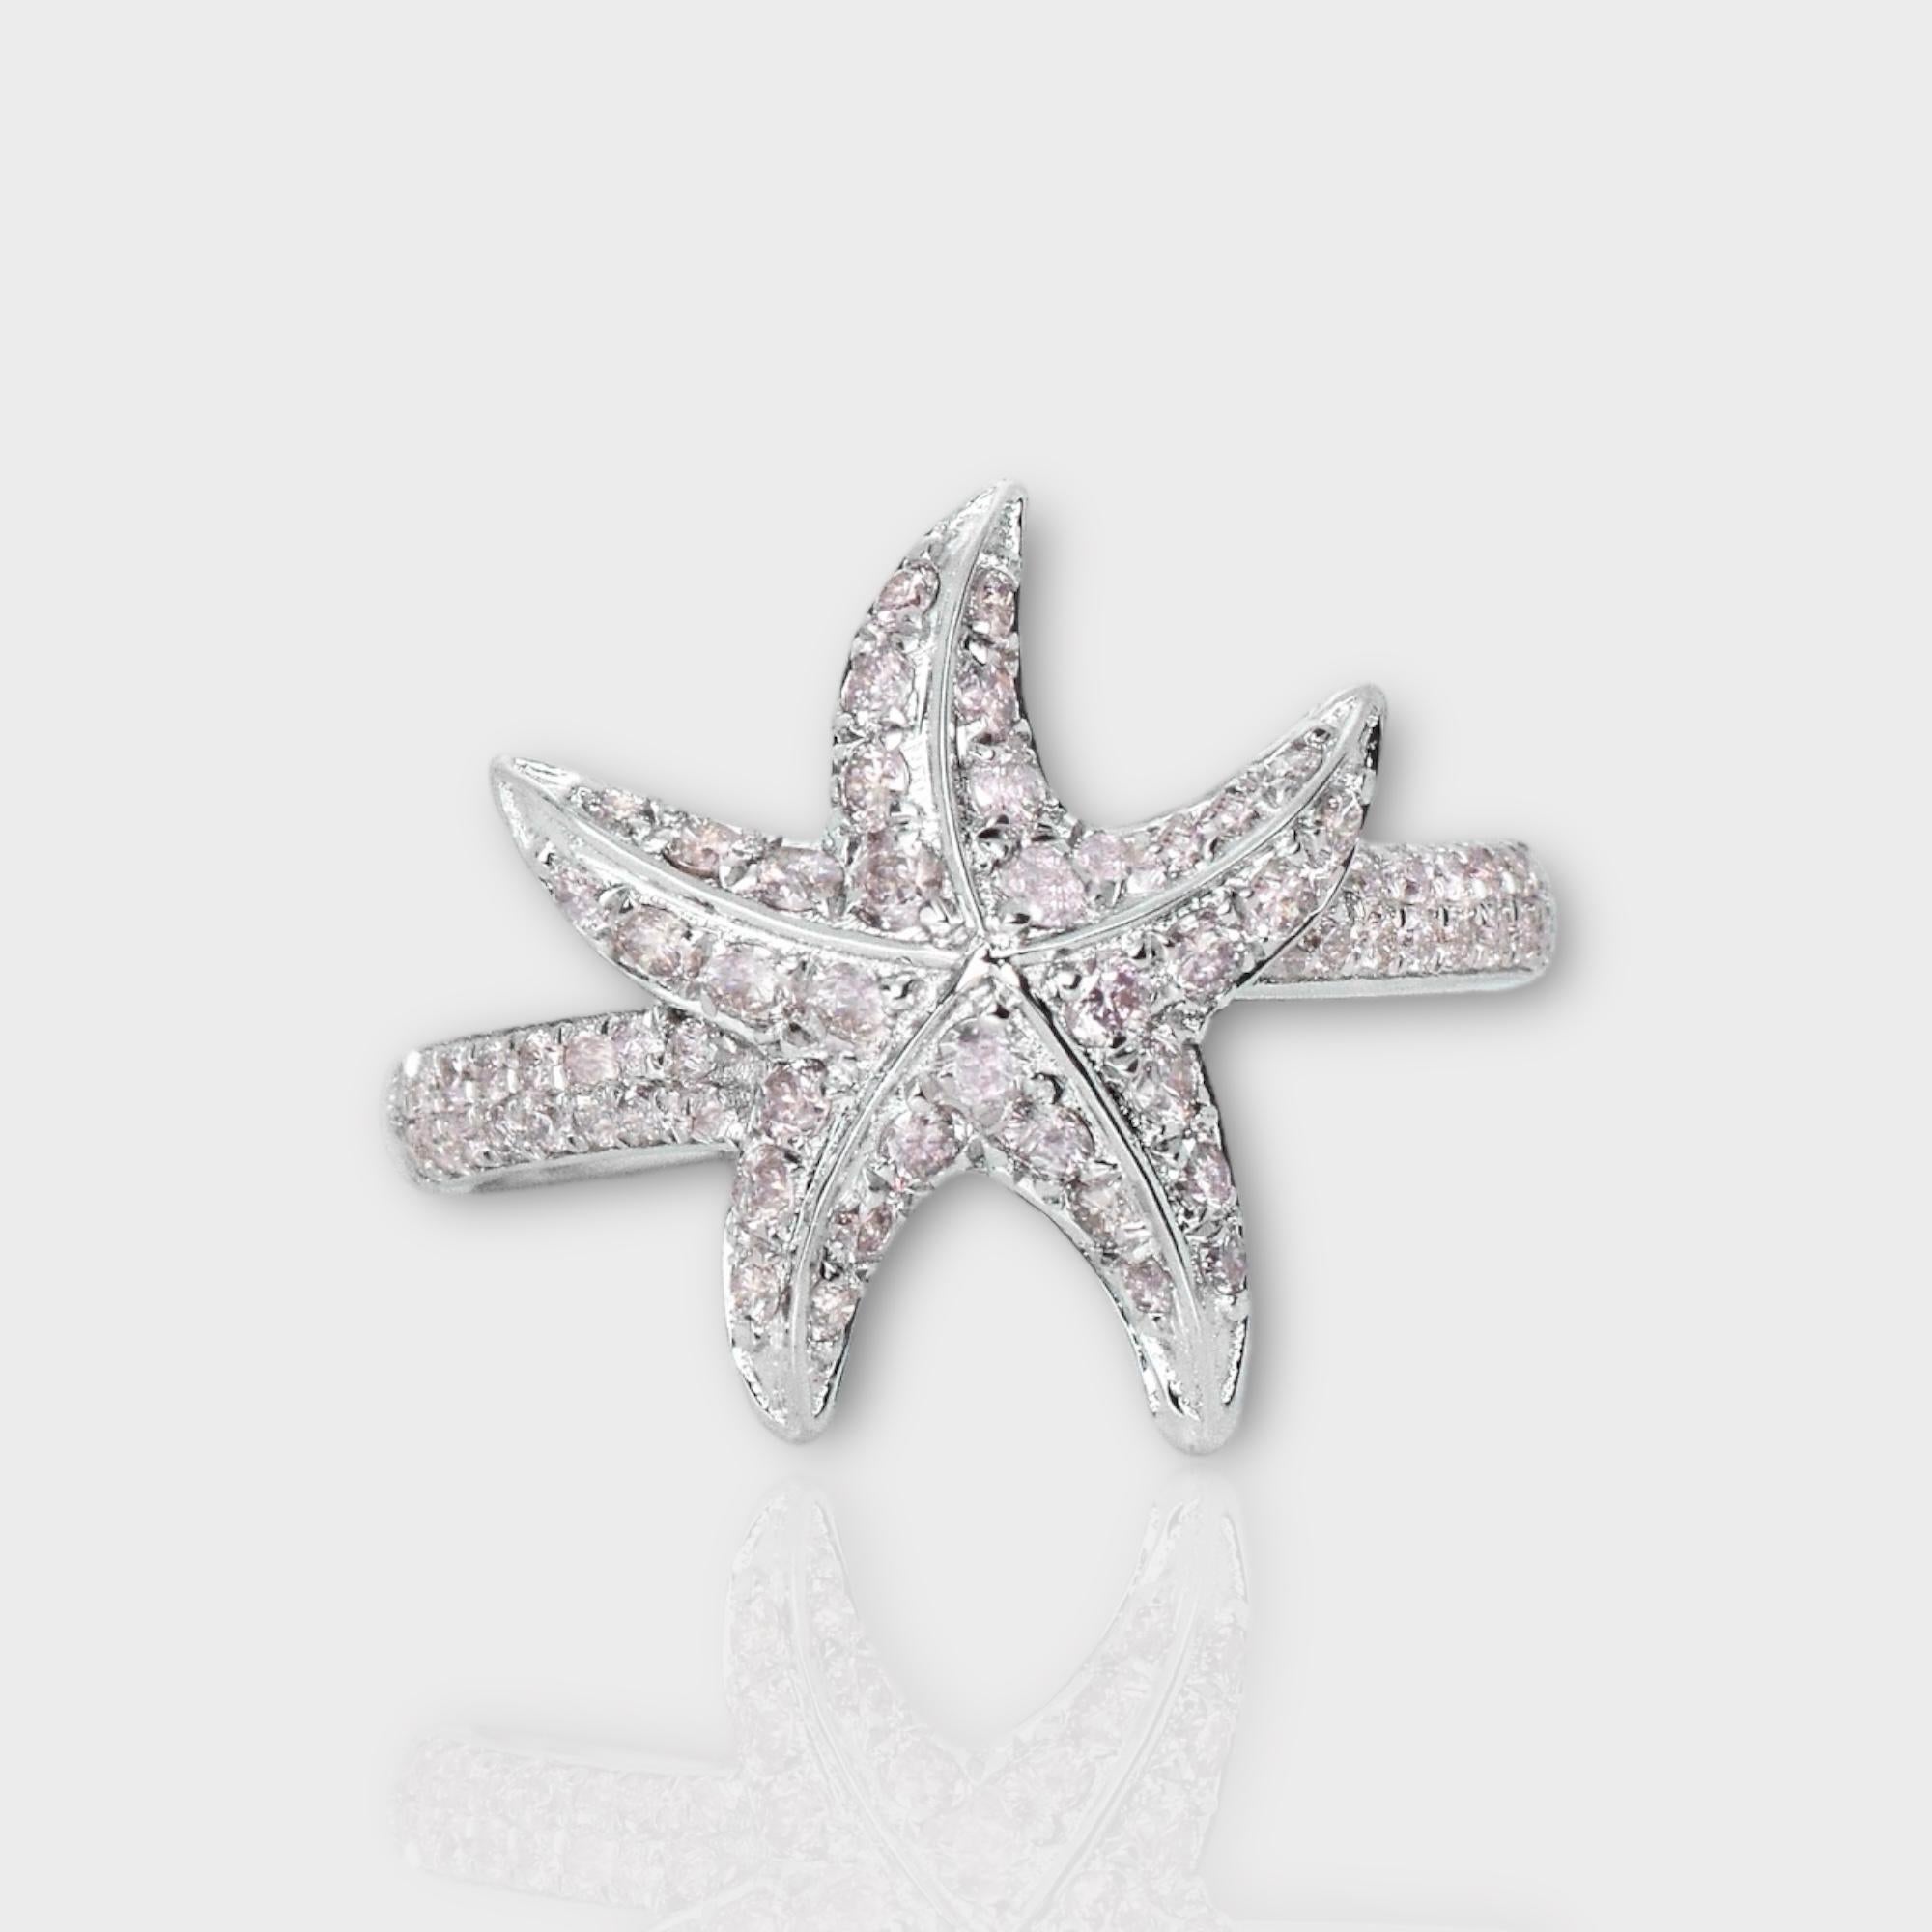 *IGI 14K 0.58 ct Natural Pink Diamonds Sea Star Design  Antique Art Deco Ring*

This band features a stunning design with a sea star crafted from 14K white gold. It is set with natural pink diamonds weighing 0.58 carats.

This ring features colorful